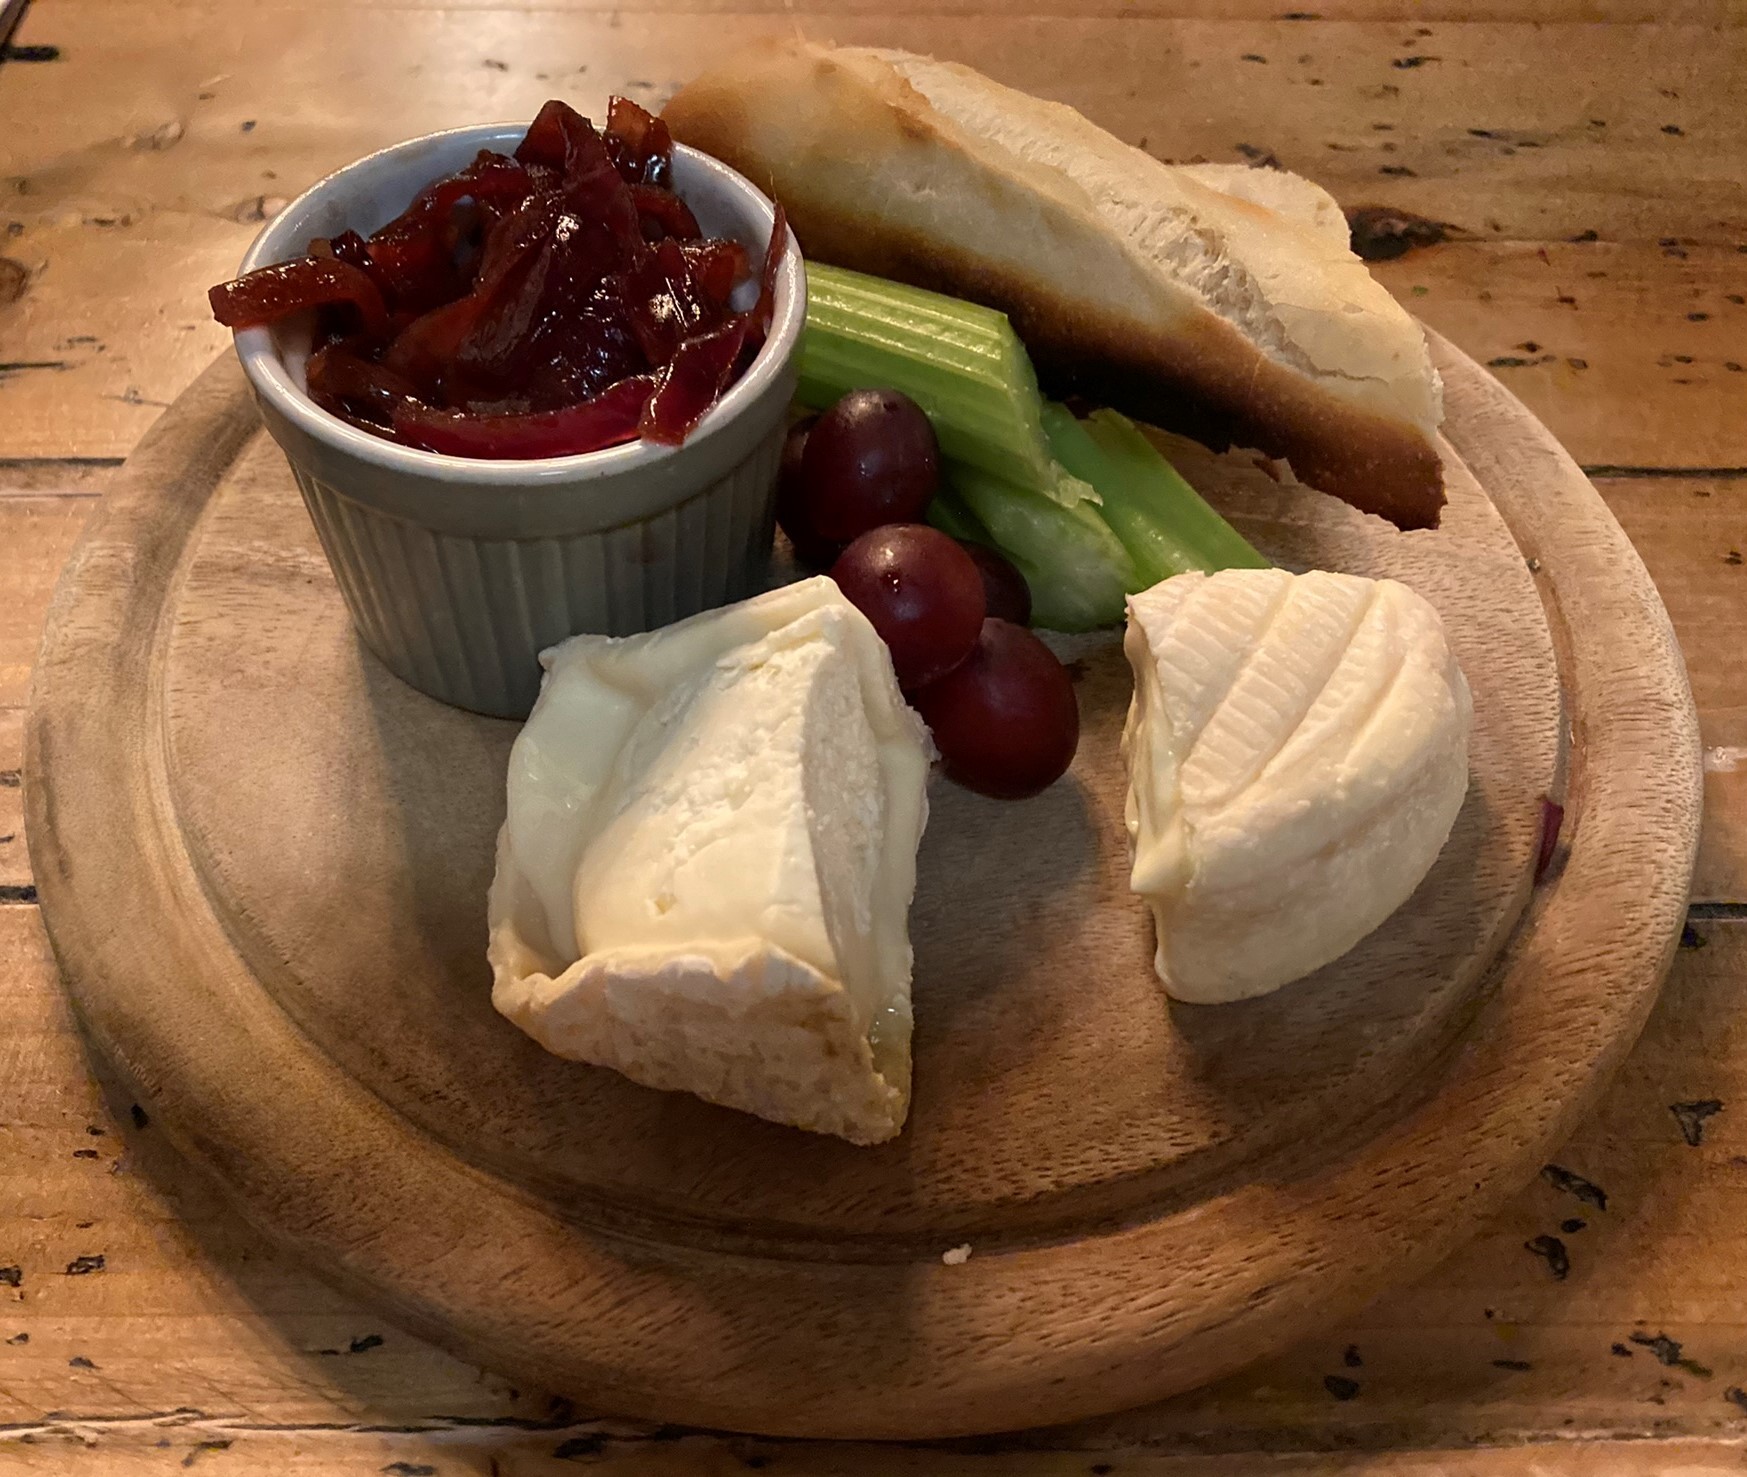 Two goey French cheeses on the cheeseboard